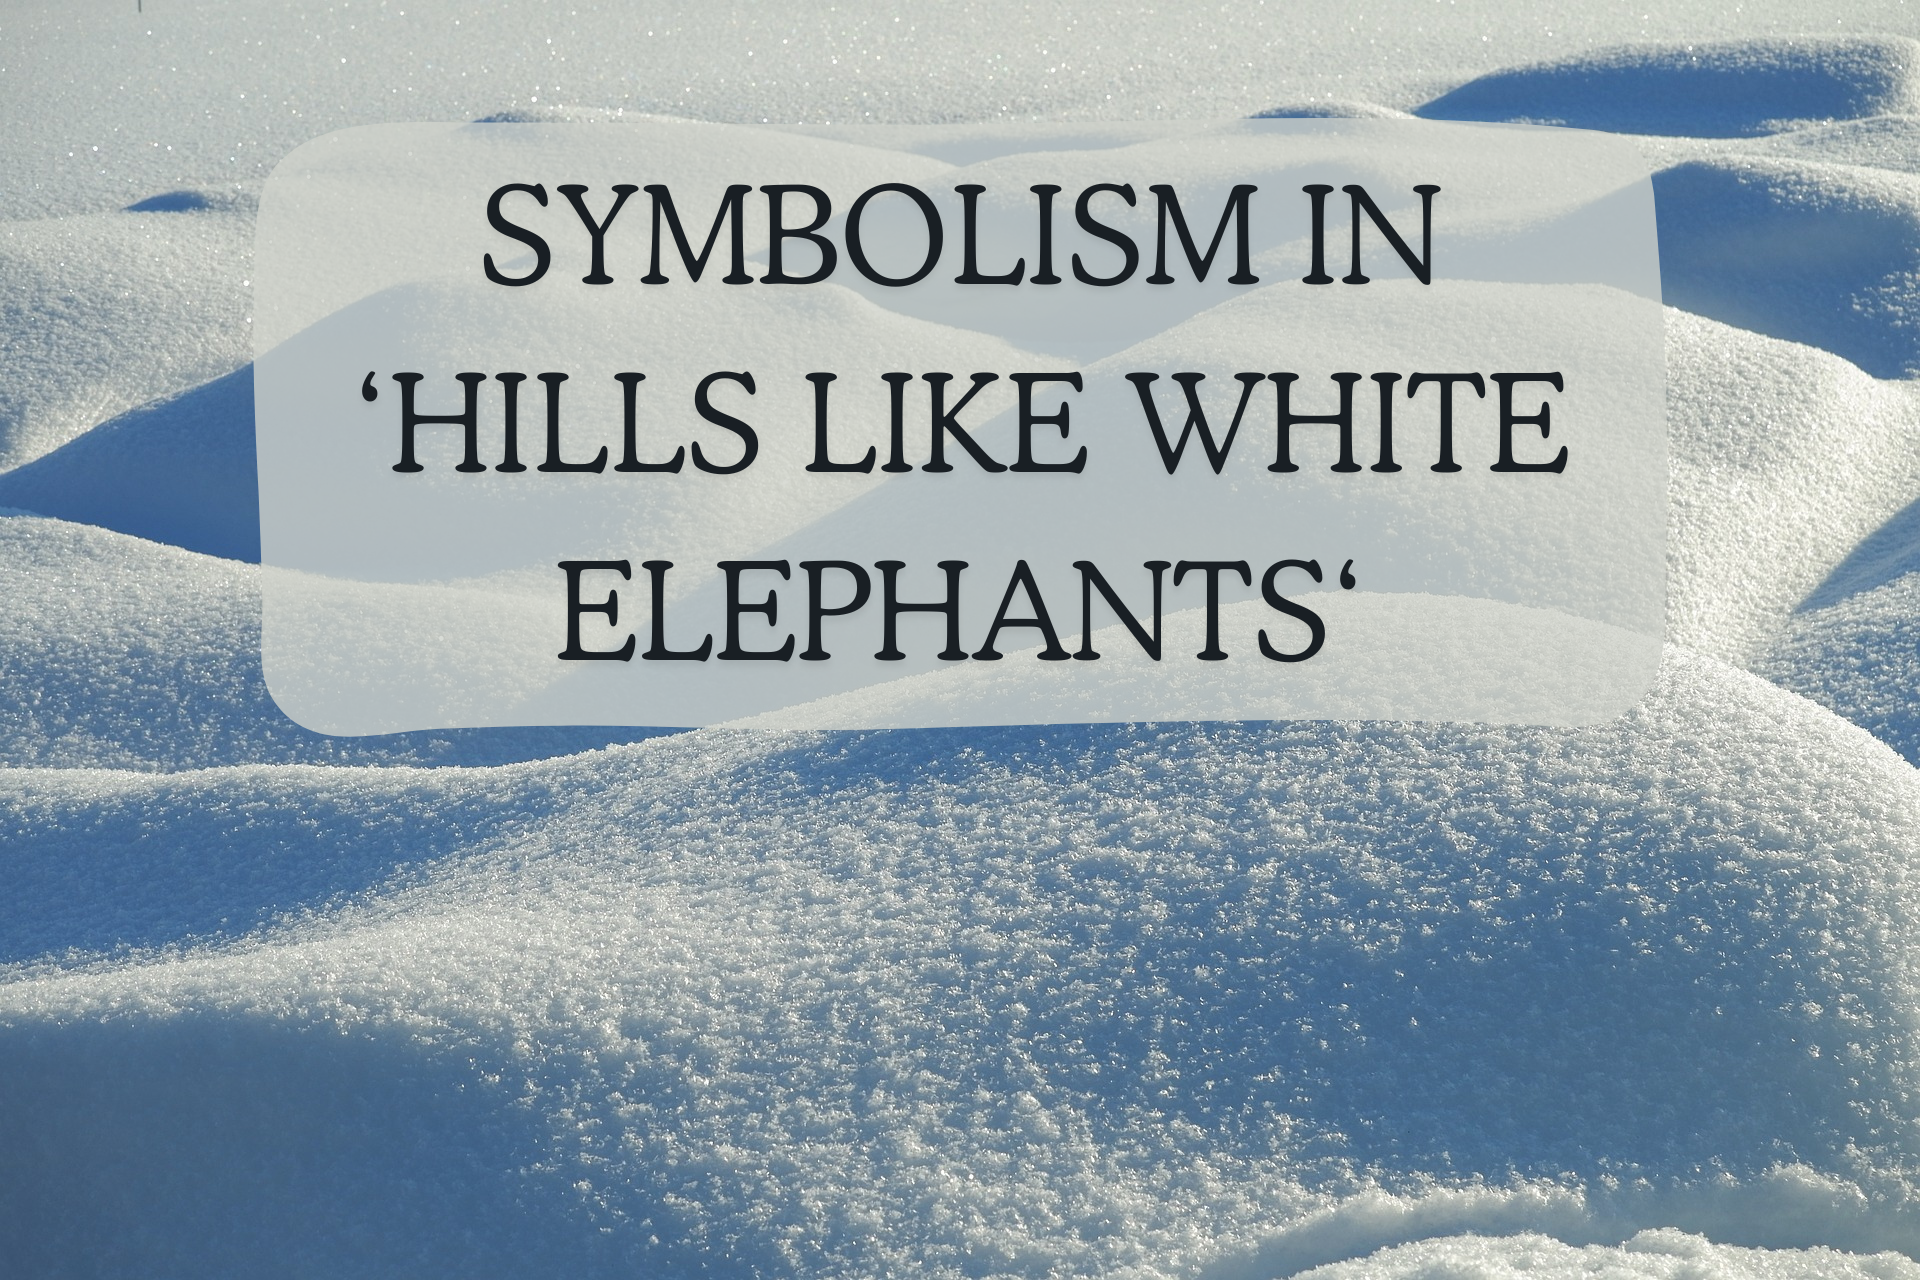 Imagery and Symbolism in Hemingway’s ‘Hills Like White Elephants’